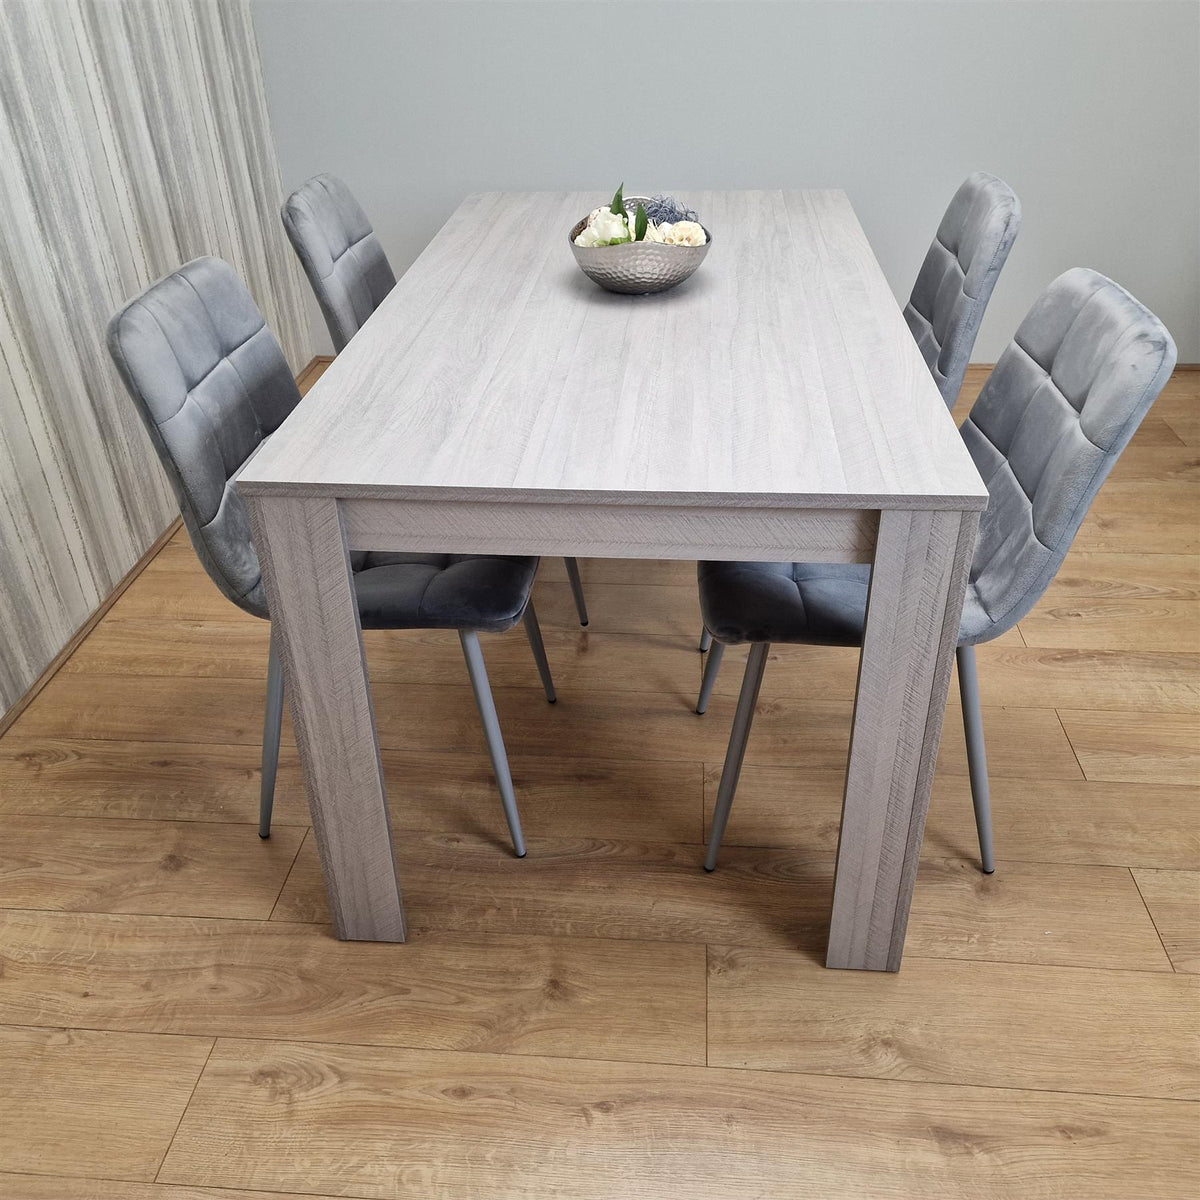 Dining Table Set with 4 Chairs Dining Room, and Kitchen table set of 4